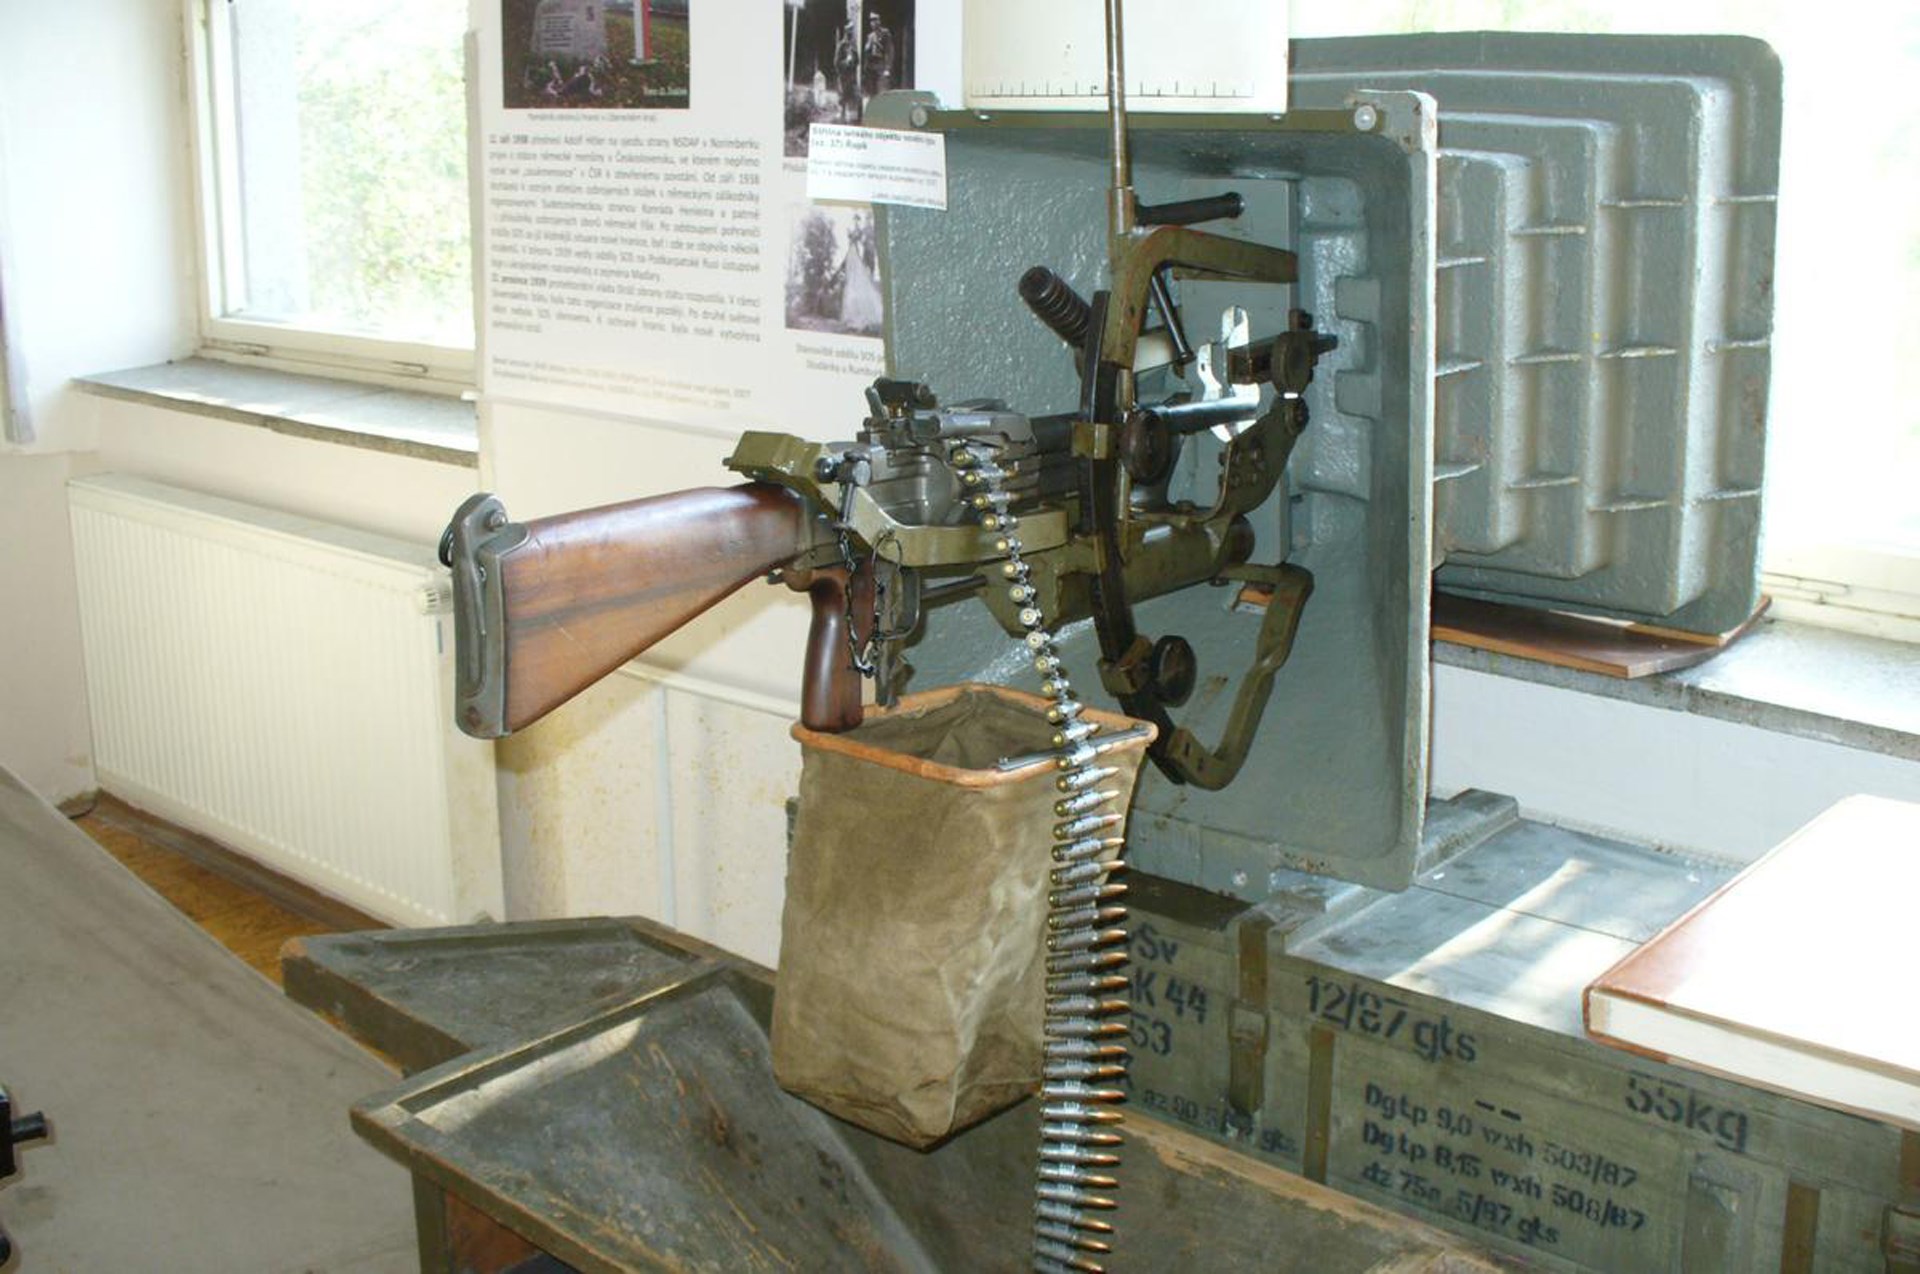 A vz. 52/57 light machine gun in 7.62×39 mm mounted in the UL-1 carriage for use in fixed defensive positions as seen in the Border Defense Minimuseum of the town of Dyjákovičky, South Moravia on the Austrian border 50 miles north of Vienna.